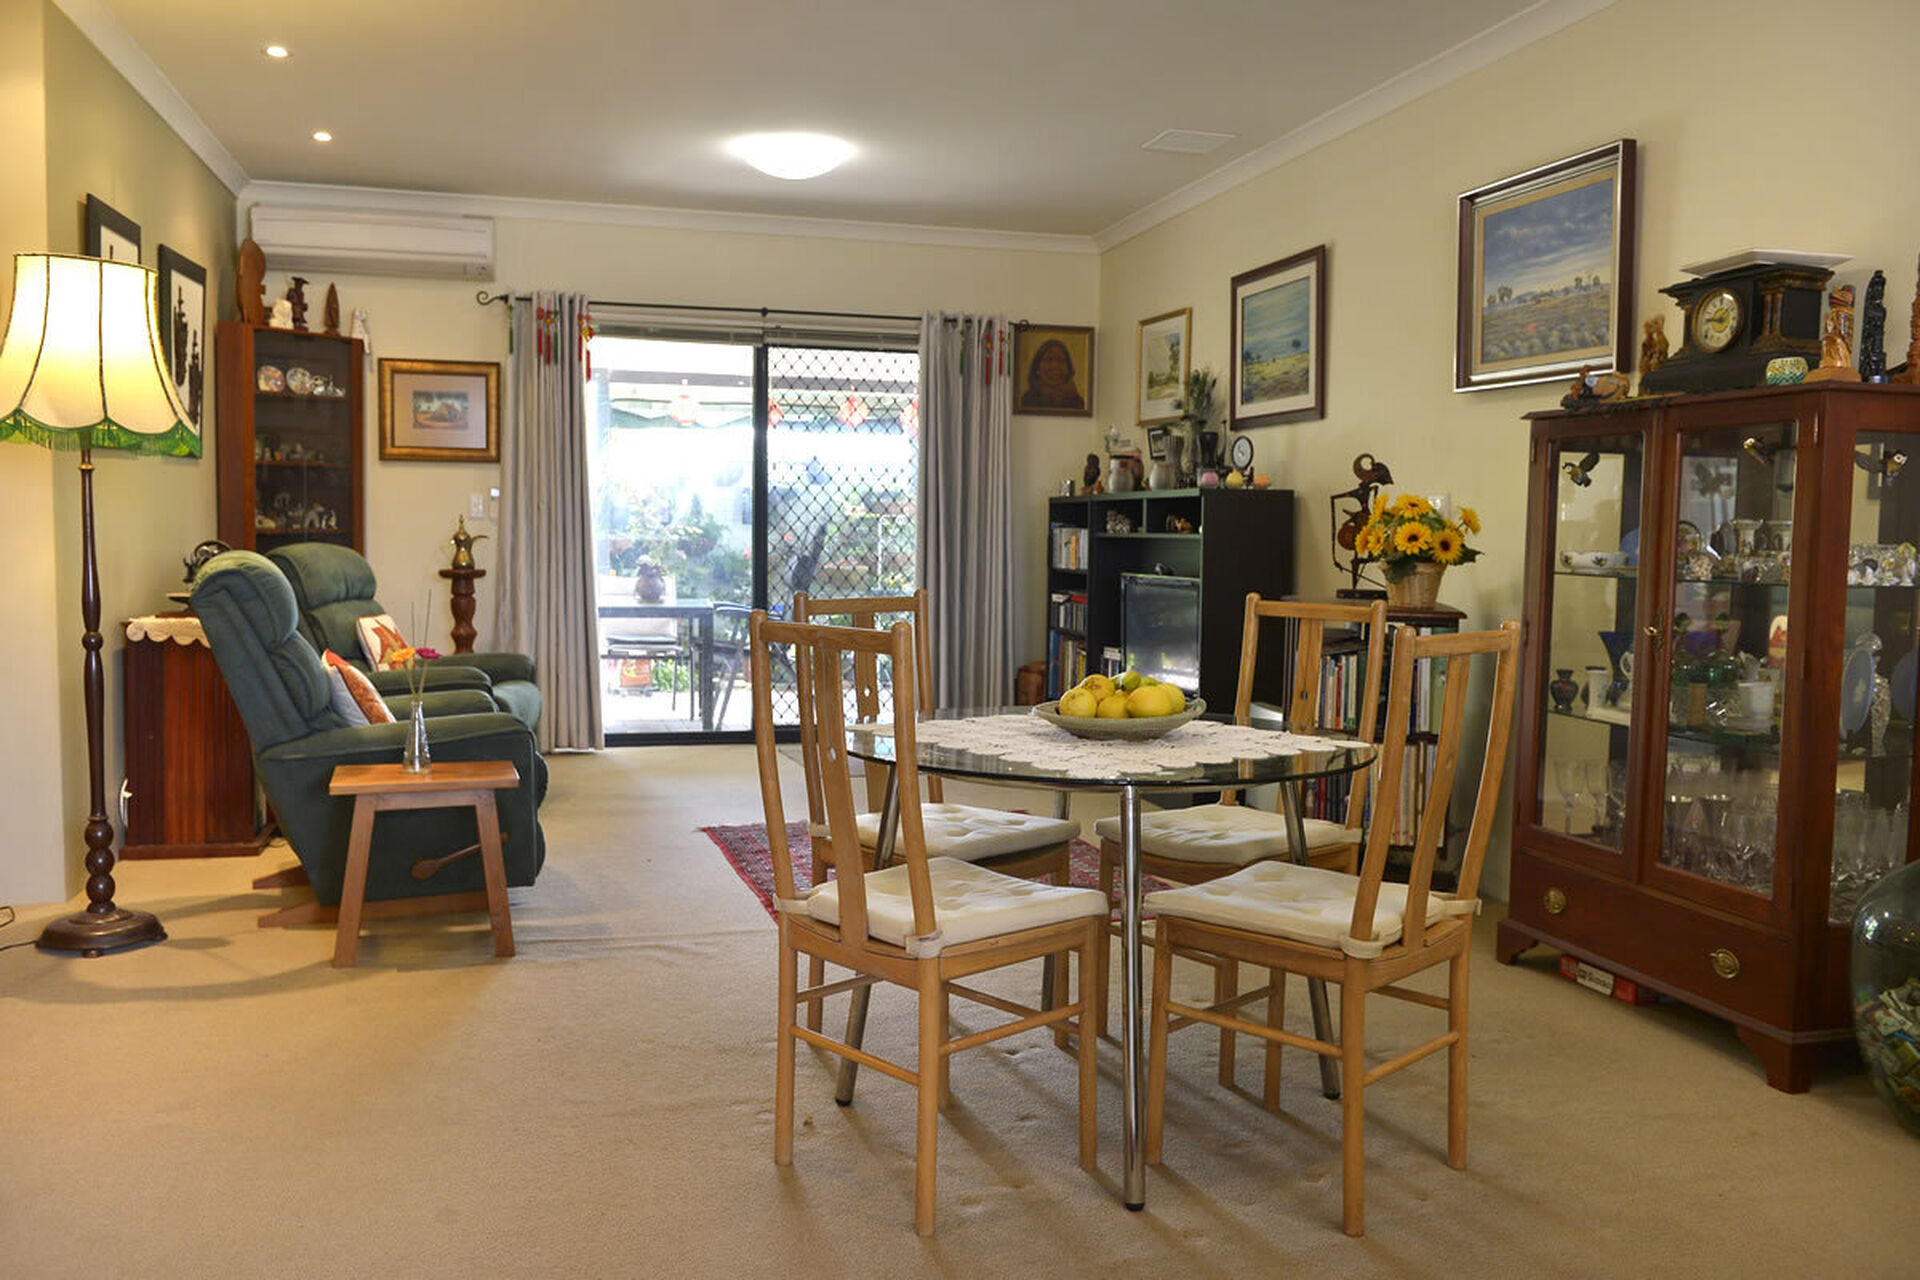 spacious interior of one of the retirement villas available at the over 55s baptistcare william carey court retirement village in busselton wa